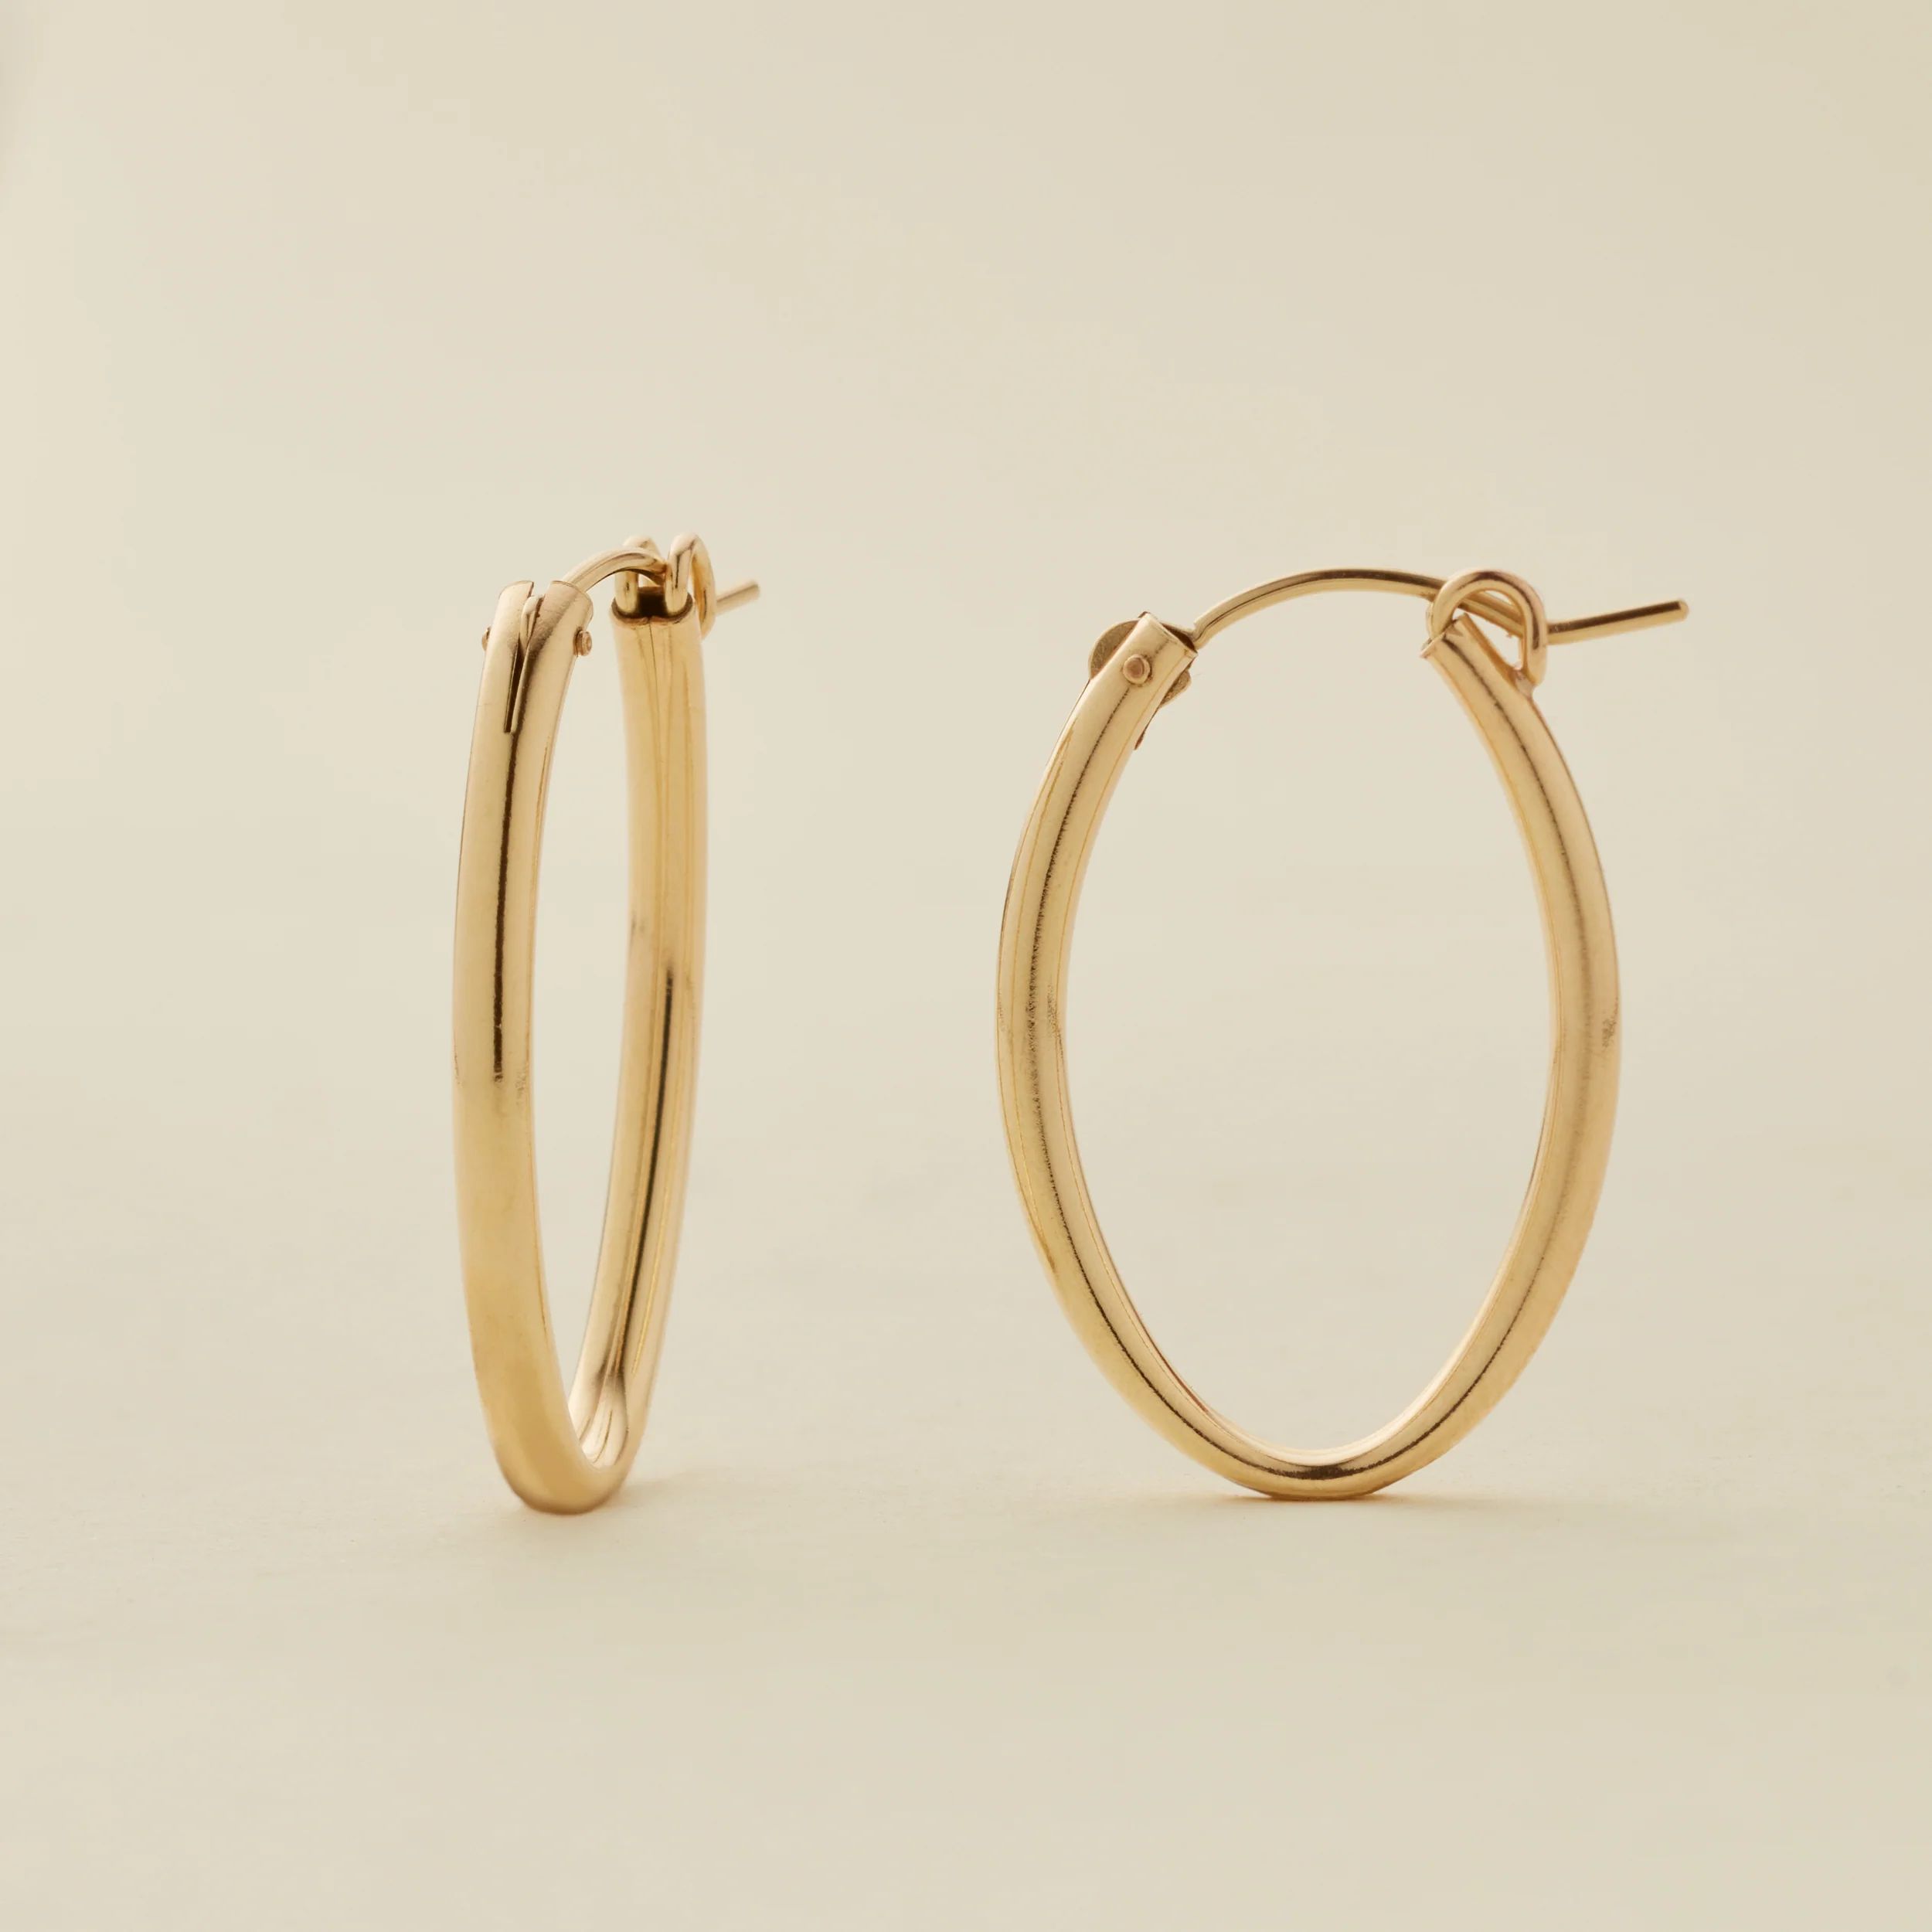 Oval Hoop Earrings | Made by Mary (US)